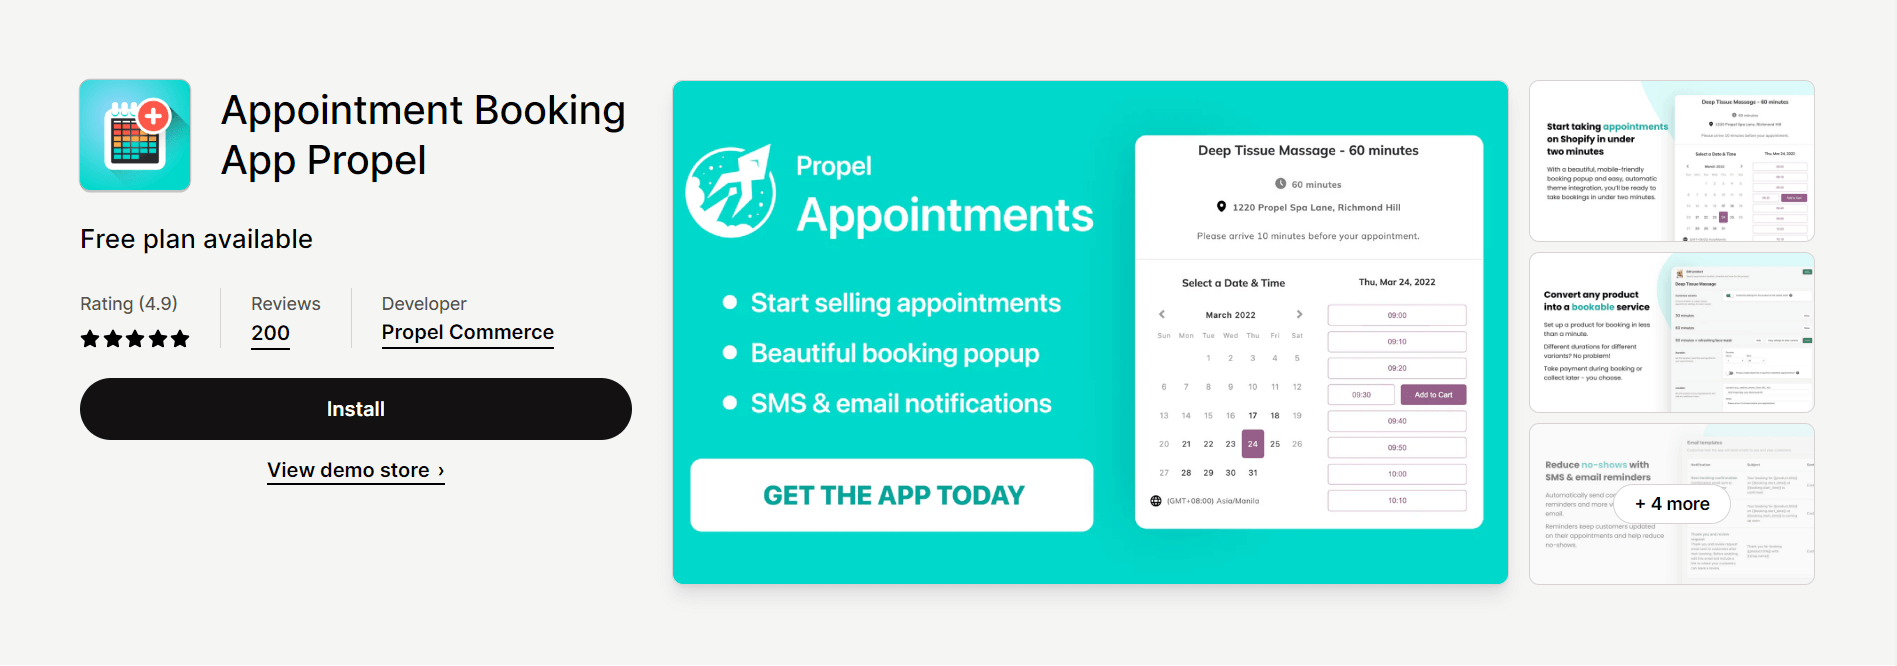 Appointment Booking App Propel 